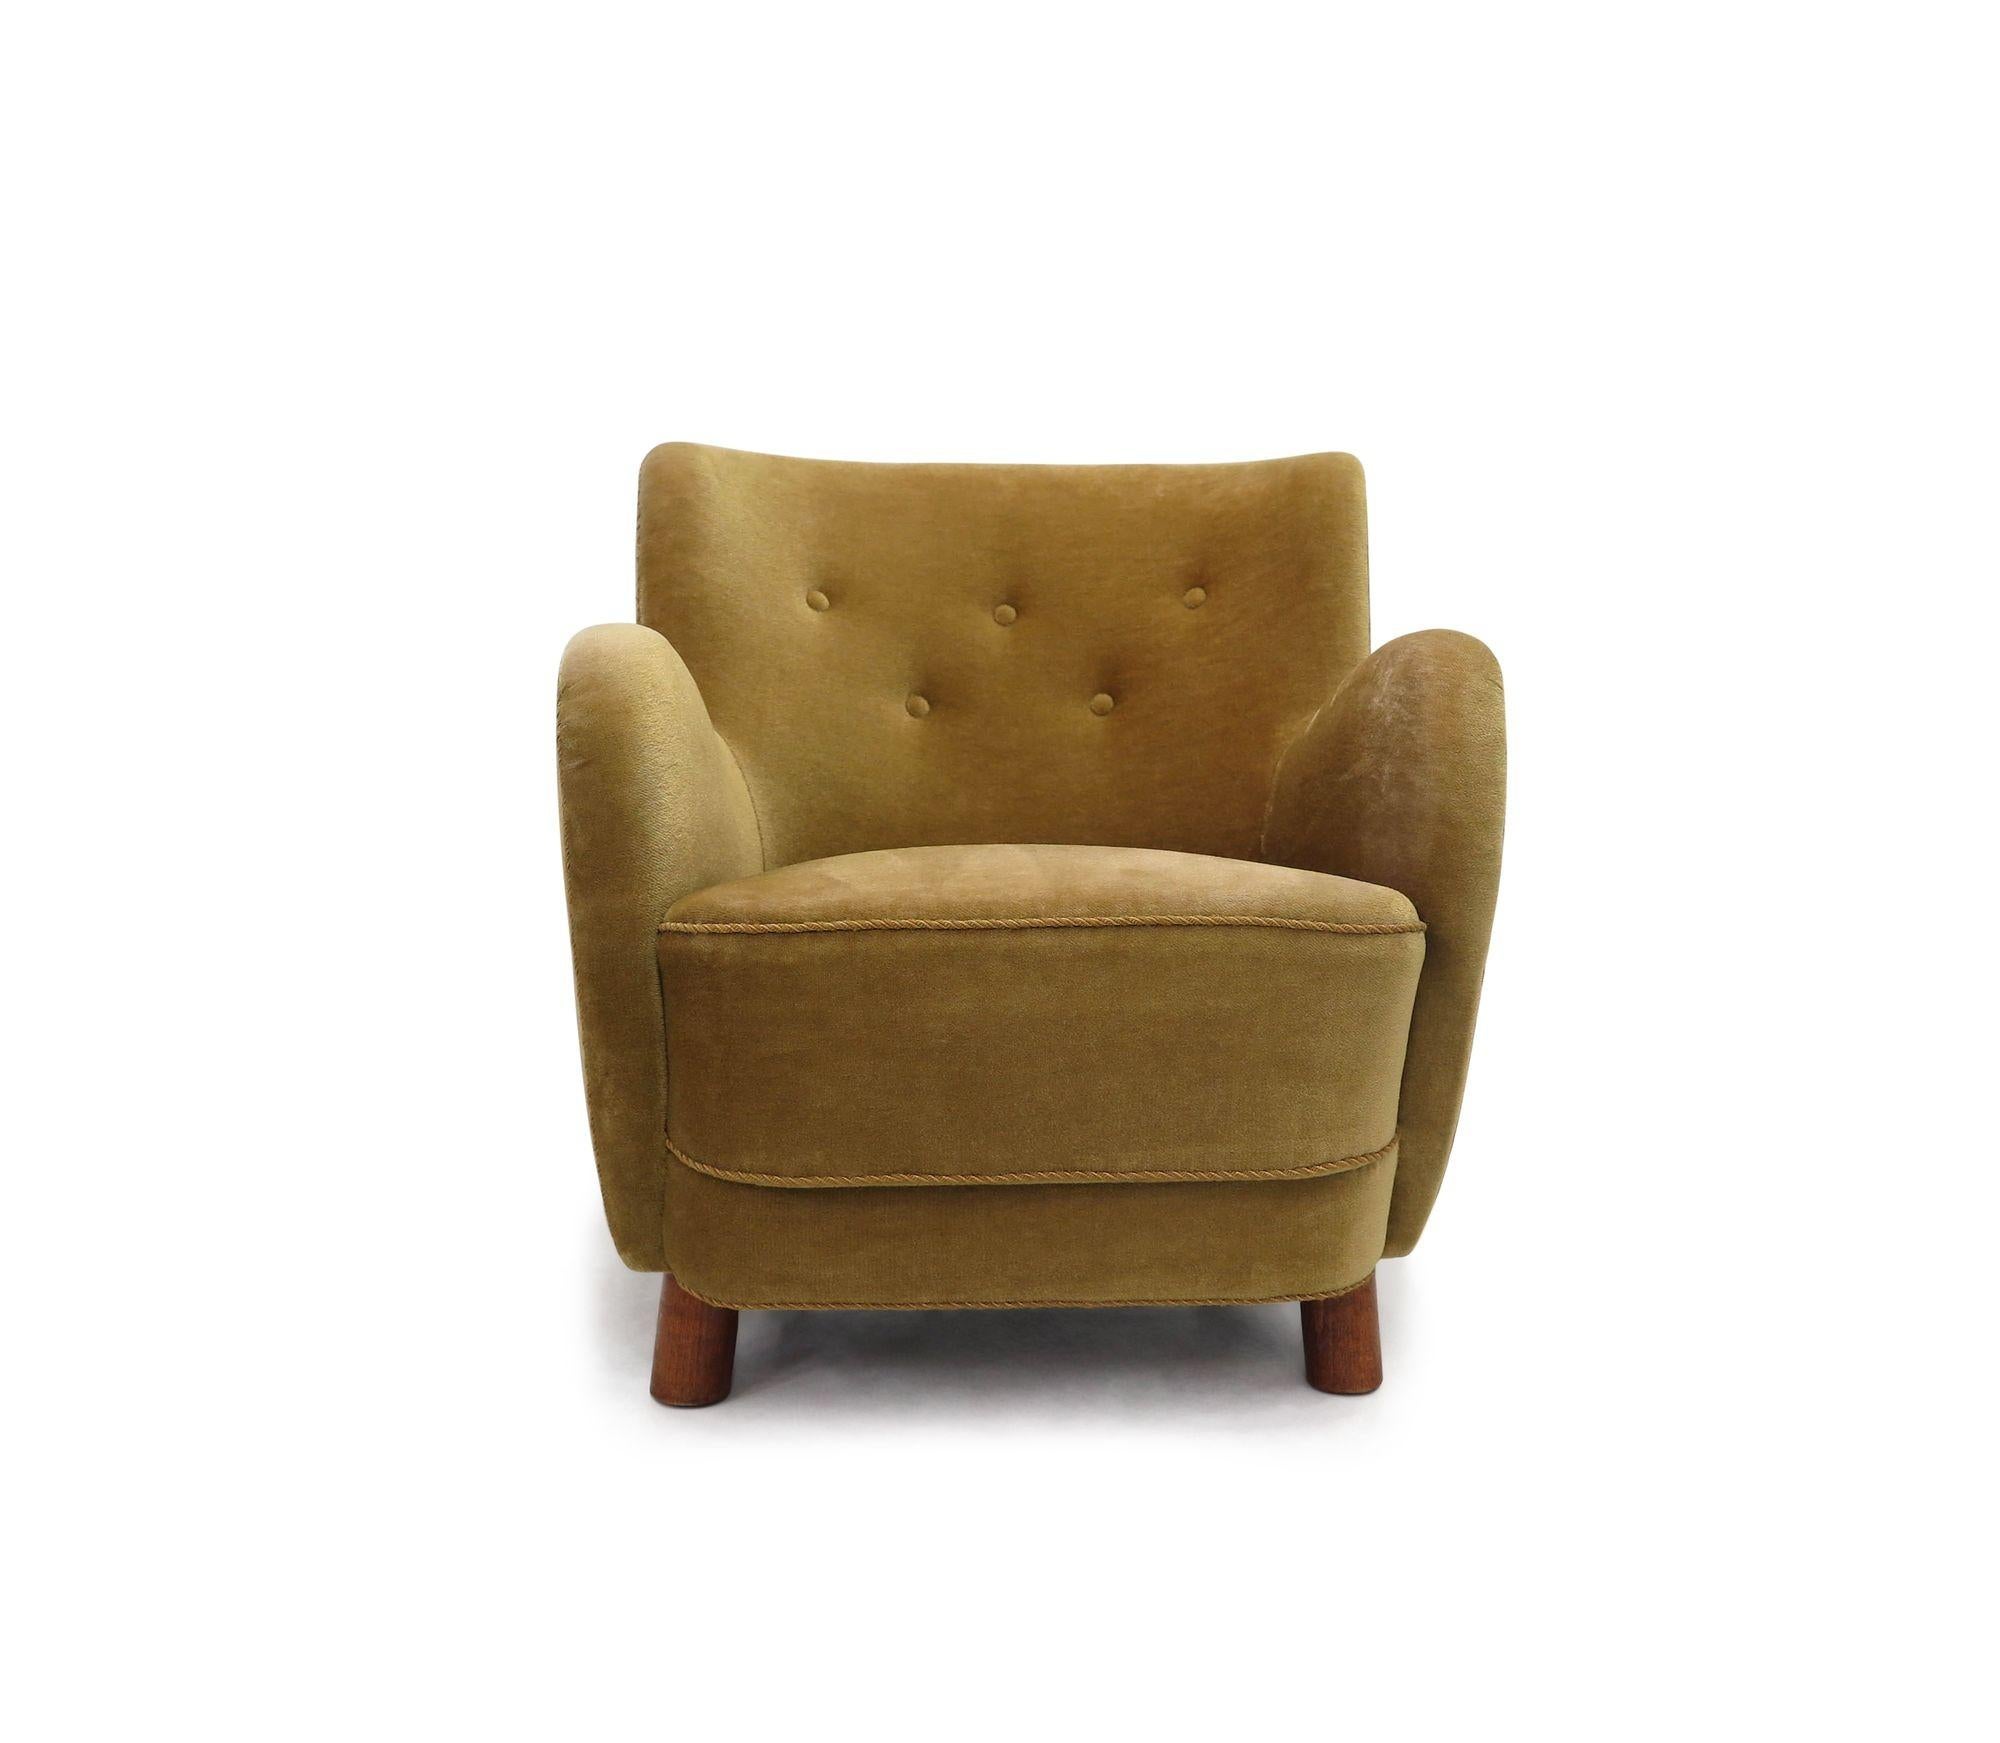 Flemming Lassen lounge chairs produced by cabinetmaker Thorald Madsen, Denmark, 1938, upholstered in the original gold mohair over a solid wood frame, copper coil springs, horsehair and cotton padding.
 
Measurements 
W 26.25'' x D 30'' x H